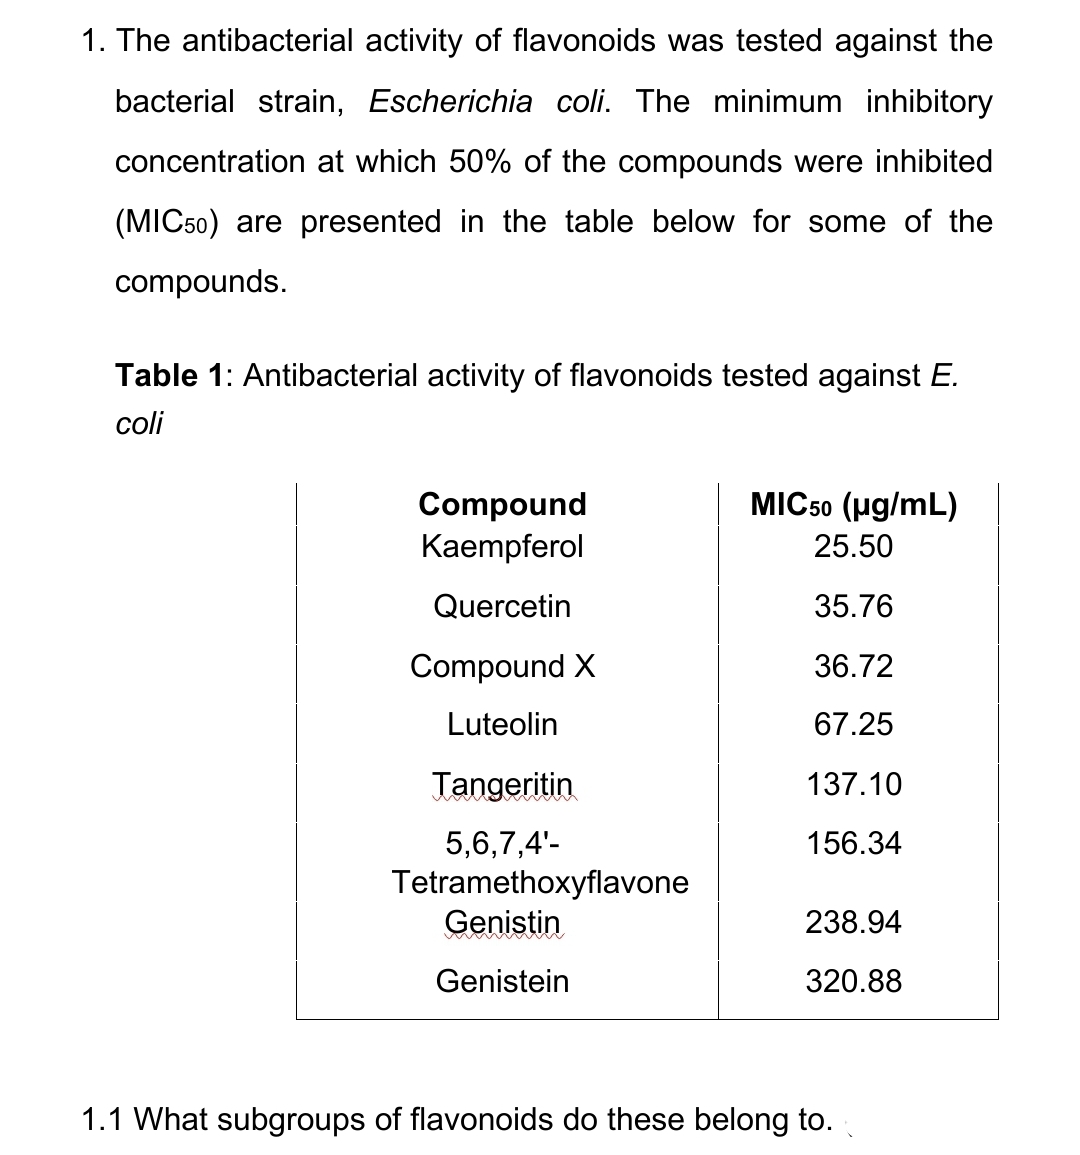 1. The antibacterial activity of flavonoids was tested against the
bacterial strain, Escherichia coli. The minimum inhibitory
concentration at which 50% of the compounds were inhibited
(MIC50) are presented in the table below for some of the
compounds.
Table 1: Antibacterial activity of flavonoids tested against E.
coli
Compound
Kaempferol
Quercetin
Compound X
Luteolin
Tangeritin
5,6,7,4'-
Tetramethoxyflavone
Genistin
Genistein
MIC50 (μg/mL)
25.50
35.76
36.72
67.25
137.10
156.34
238.94
320.88
1.1 What subgroups of flavonoids do these belong to.